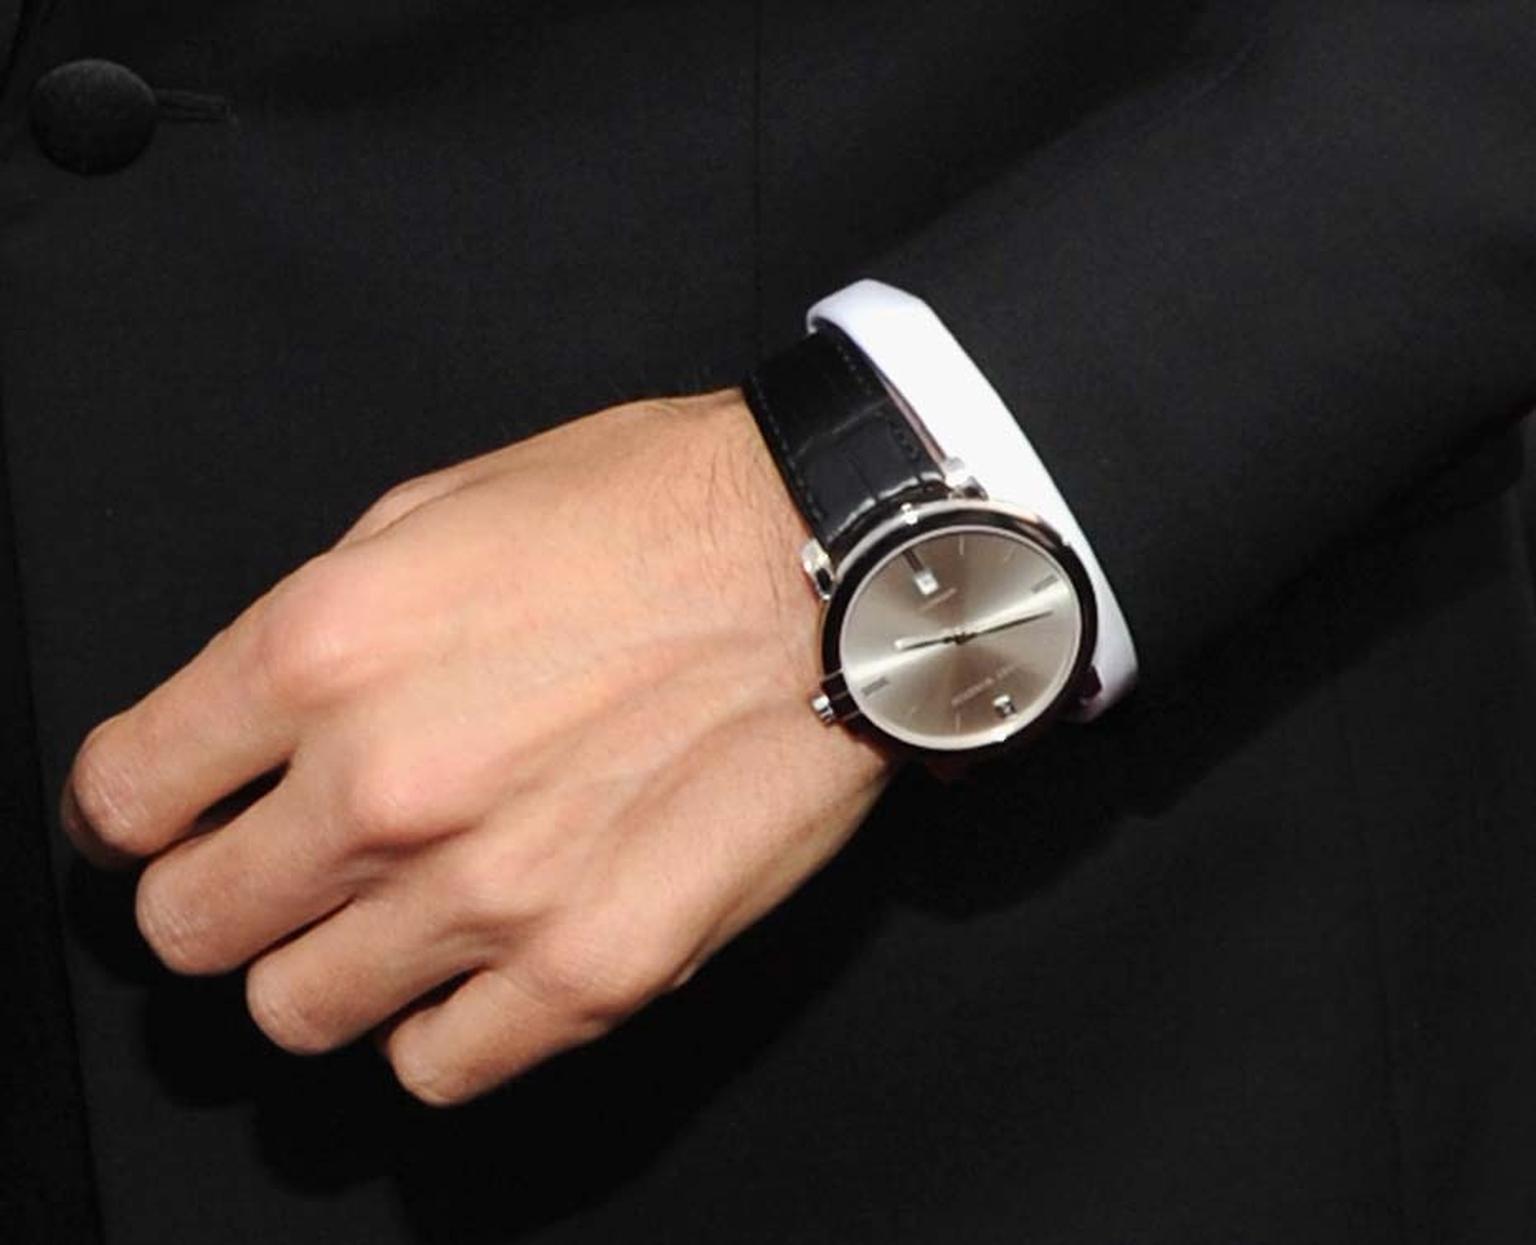 A close up of the Harry Winston Midnight watch worn by Jared Leto at the Screen Actors Guild Awards 2014